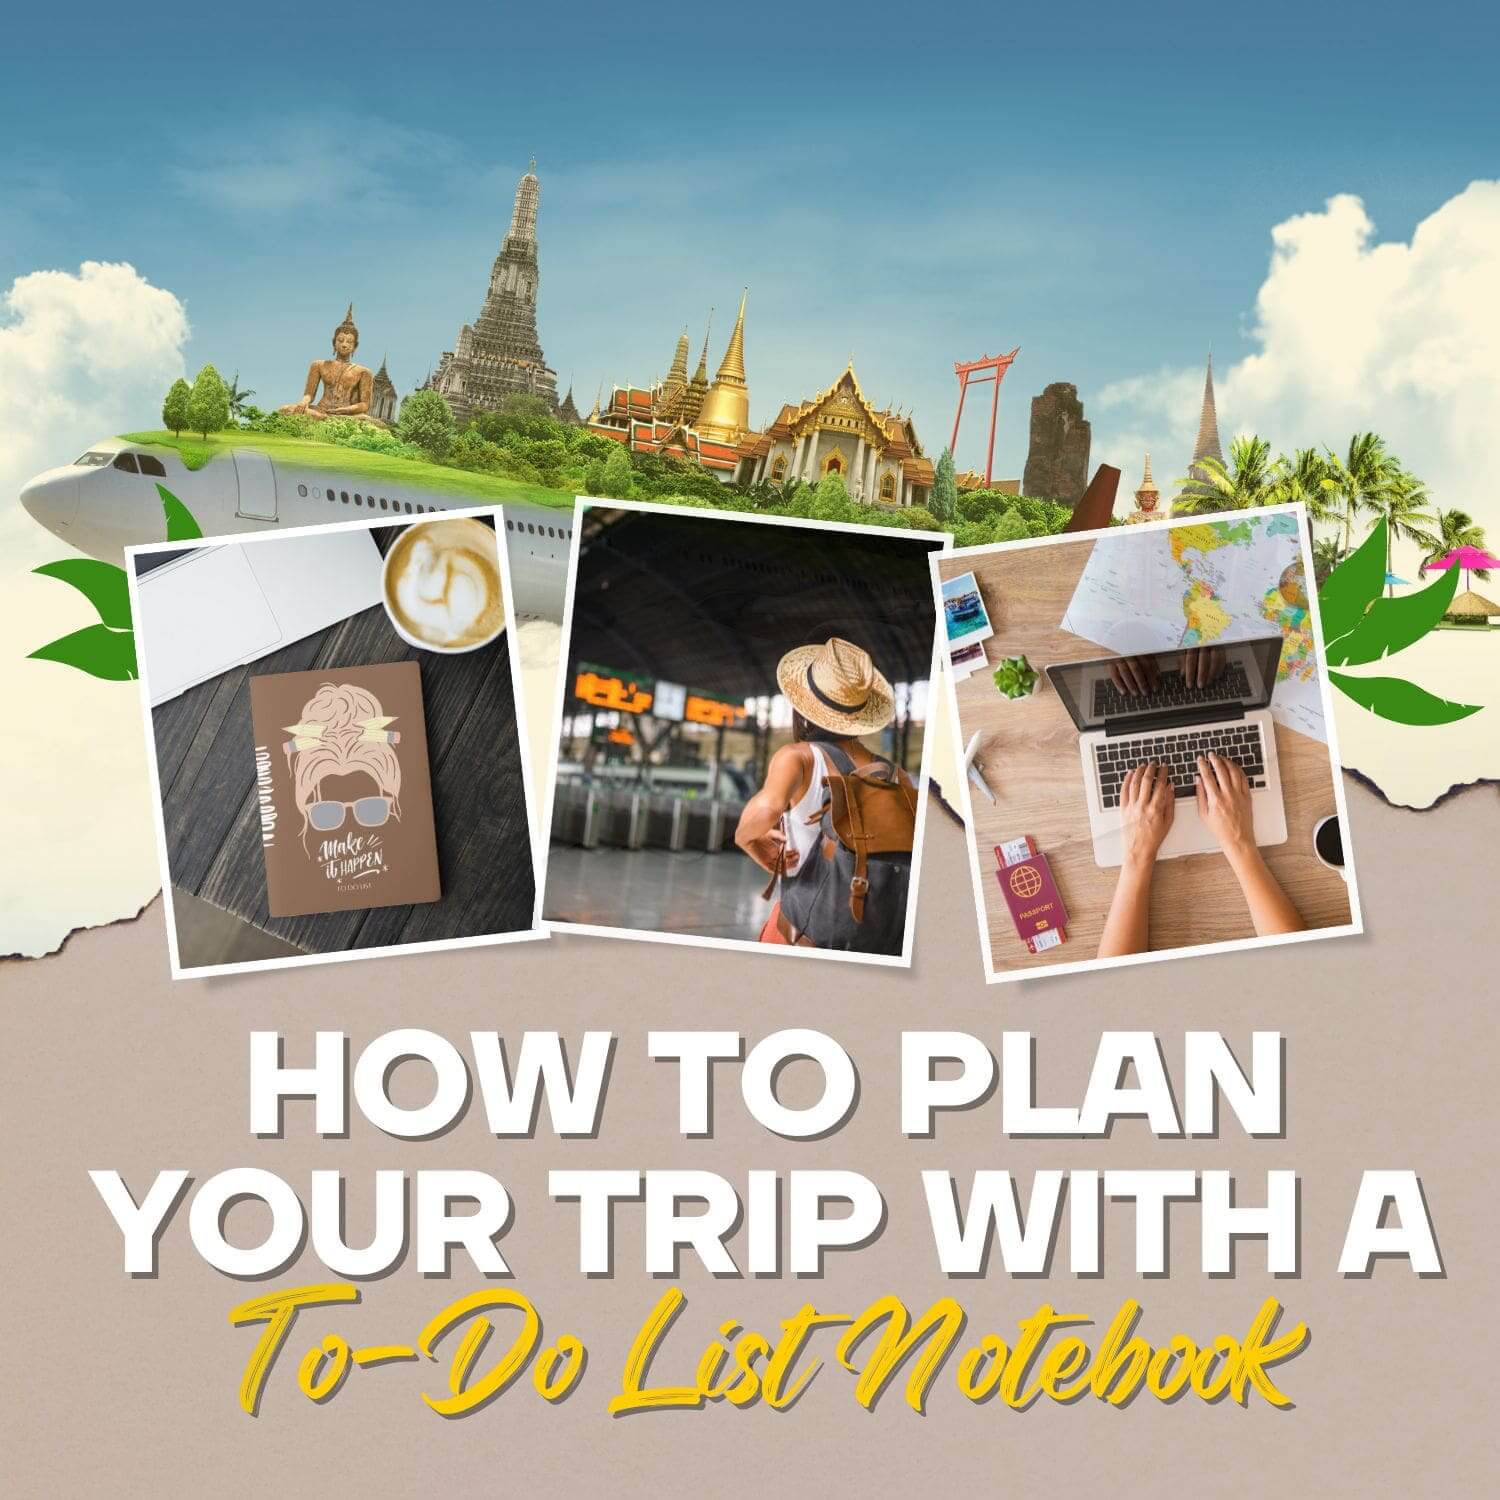 How to Plan Your Trip With a To-Do List Notebook